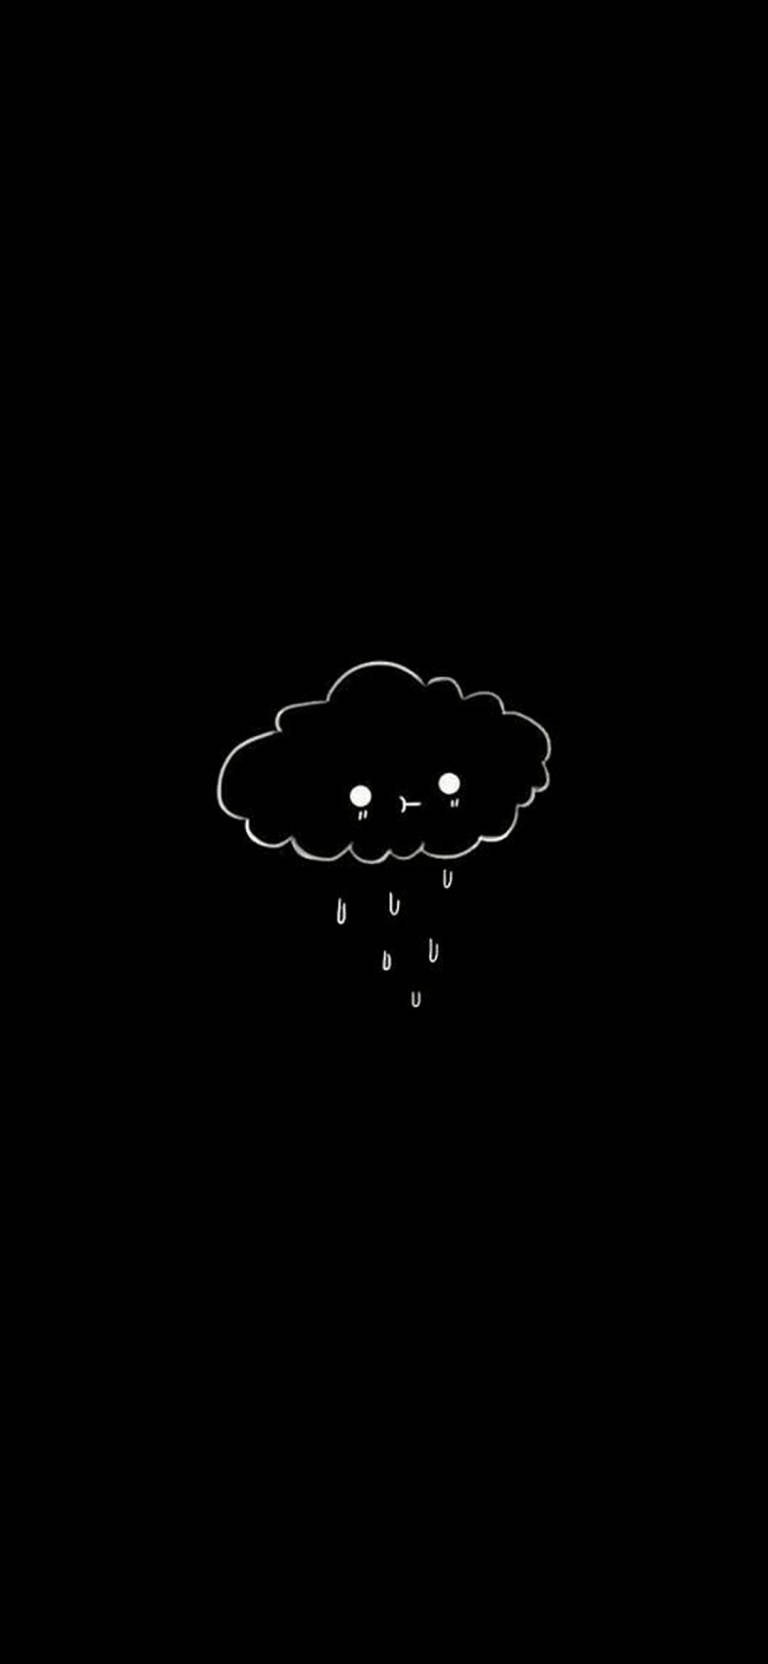 Cute Black And White Aesthetic Smiling Raincloud Background